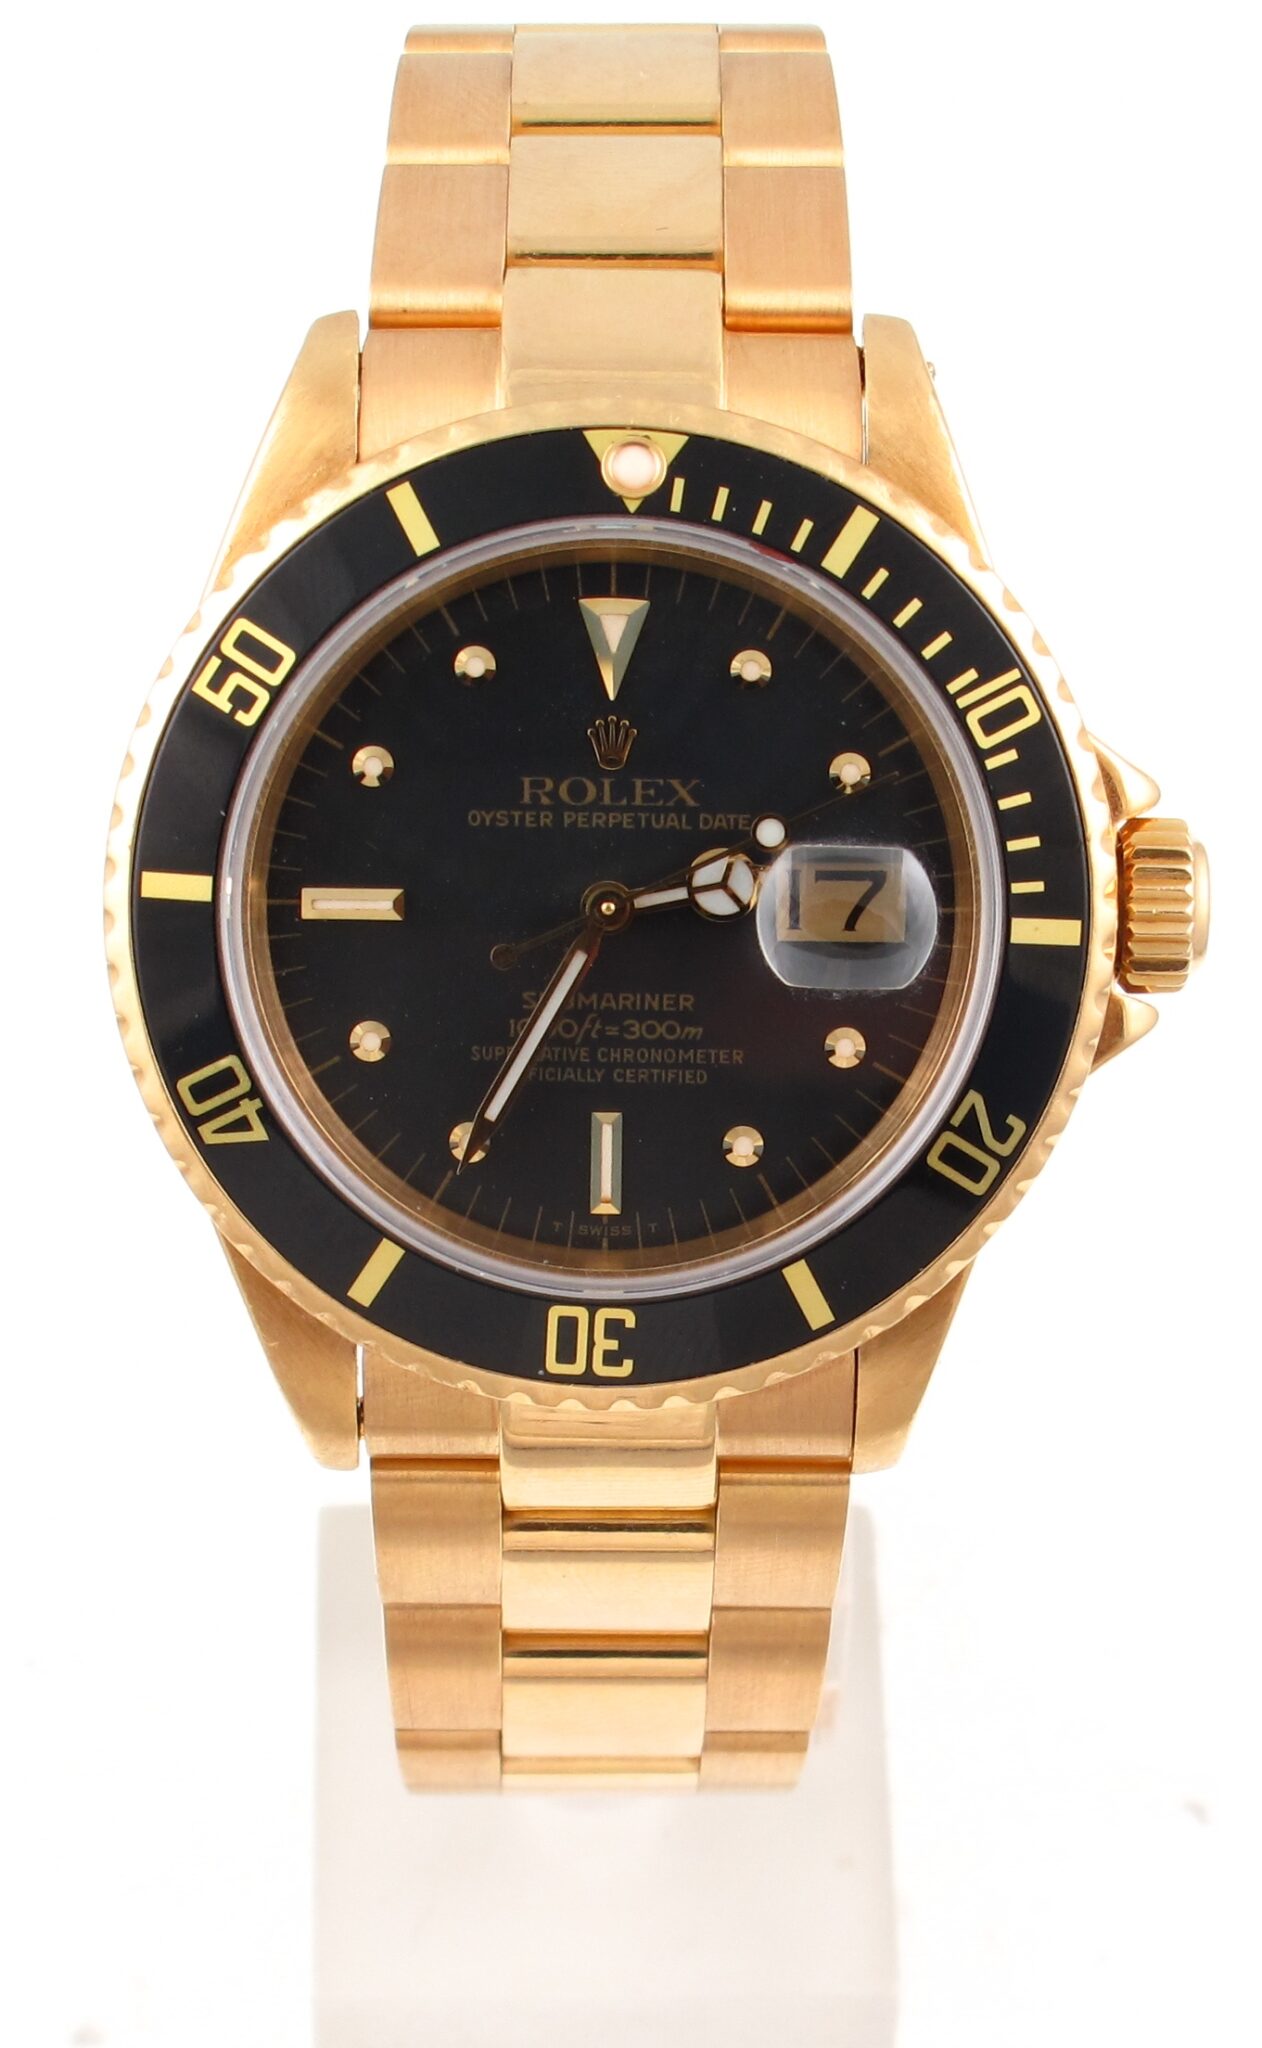 Pre-owned Rolex Submariner Black (1980) Yellow Gold 16808